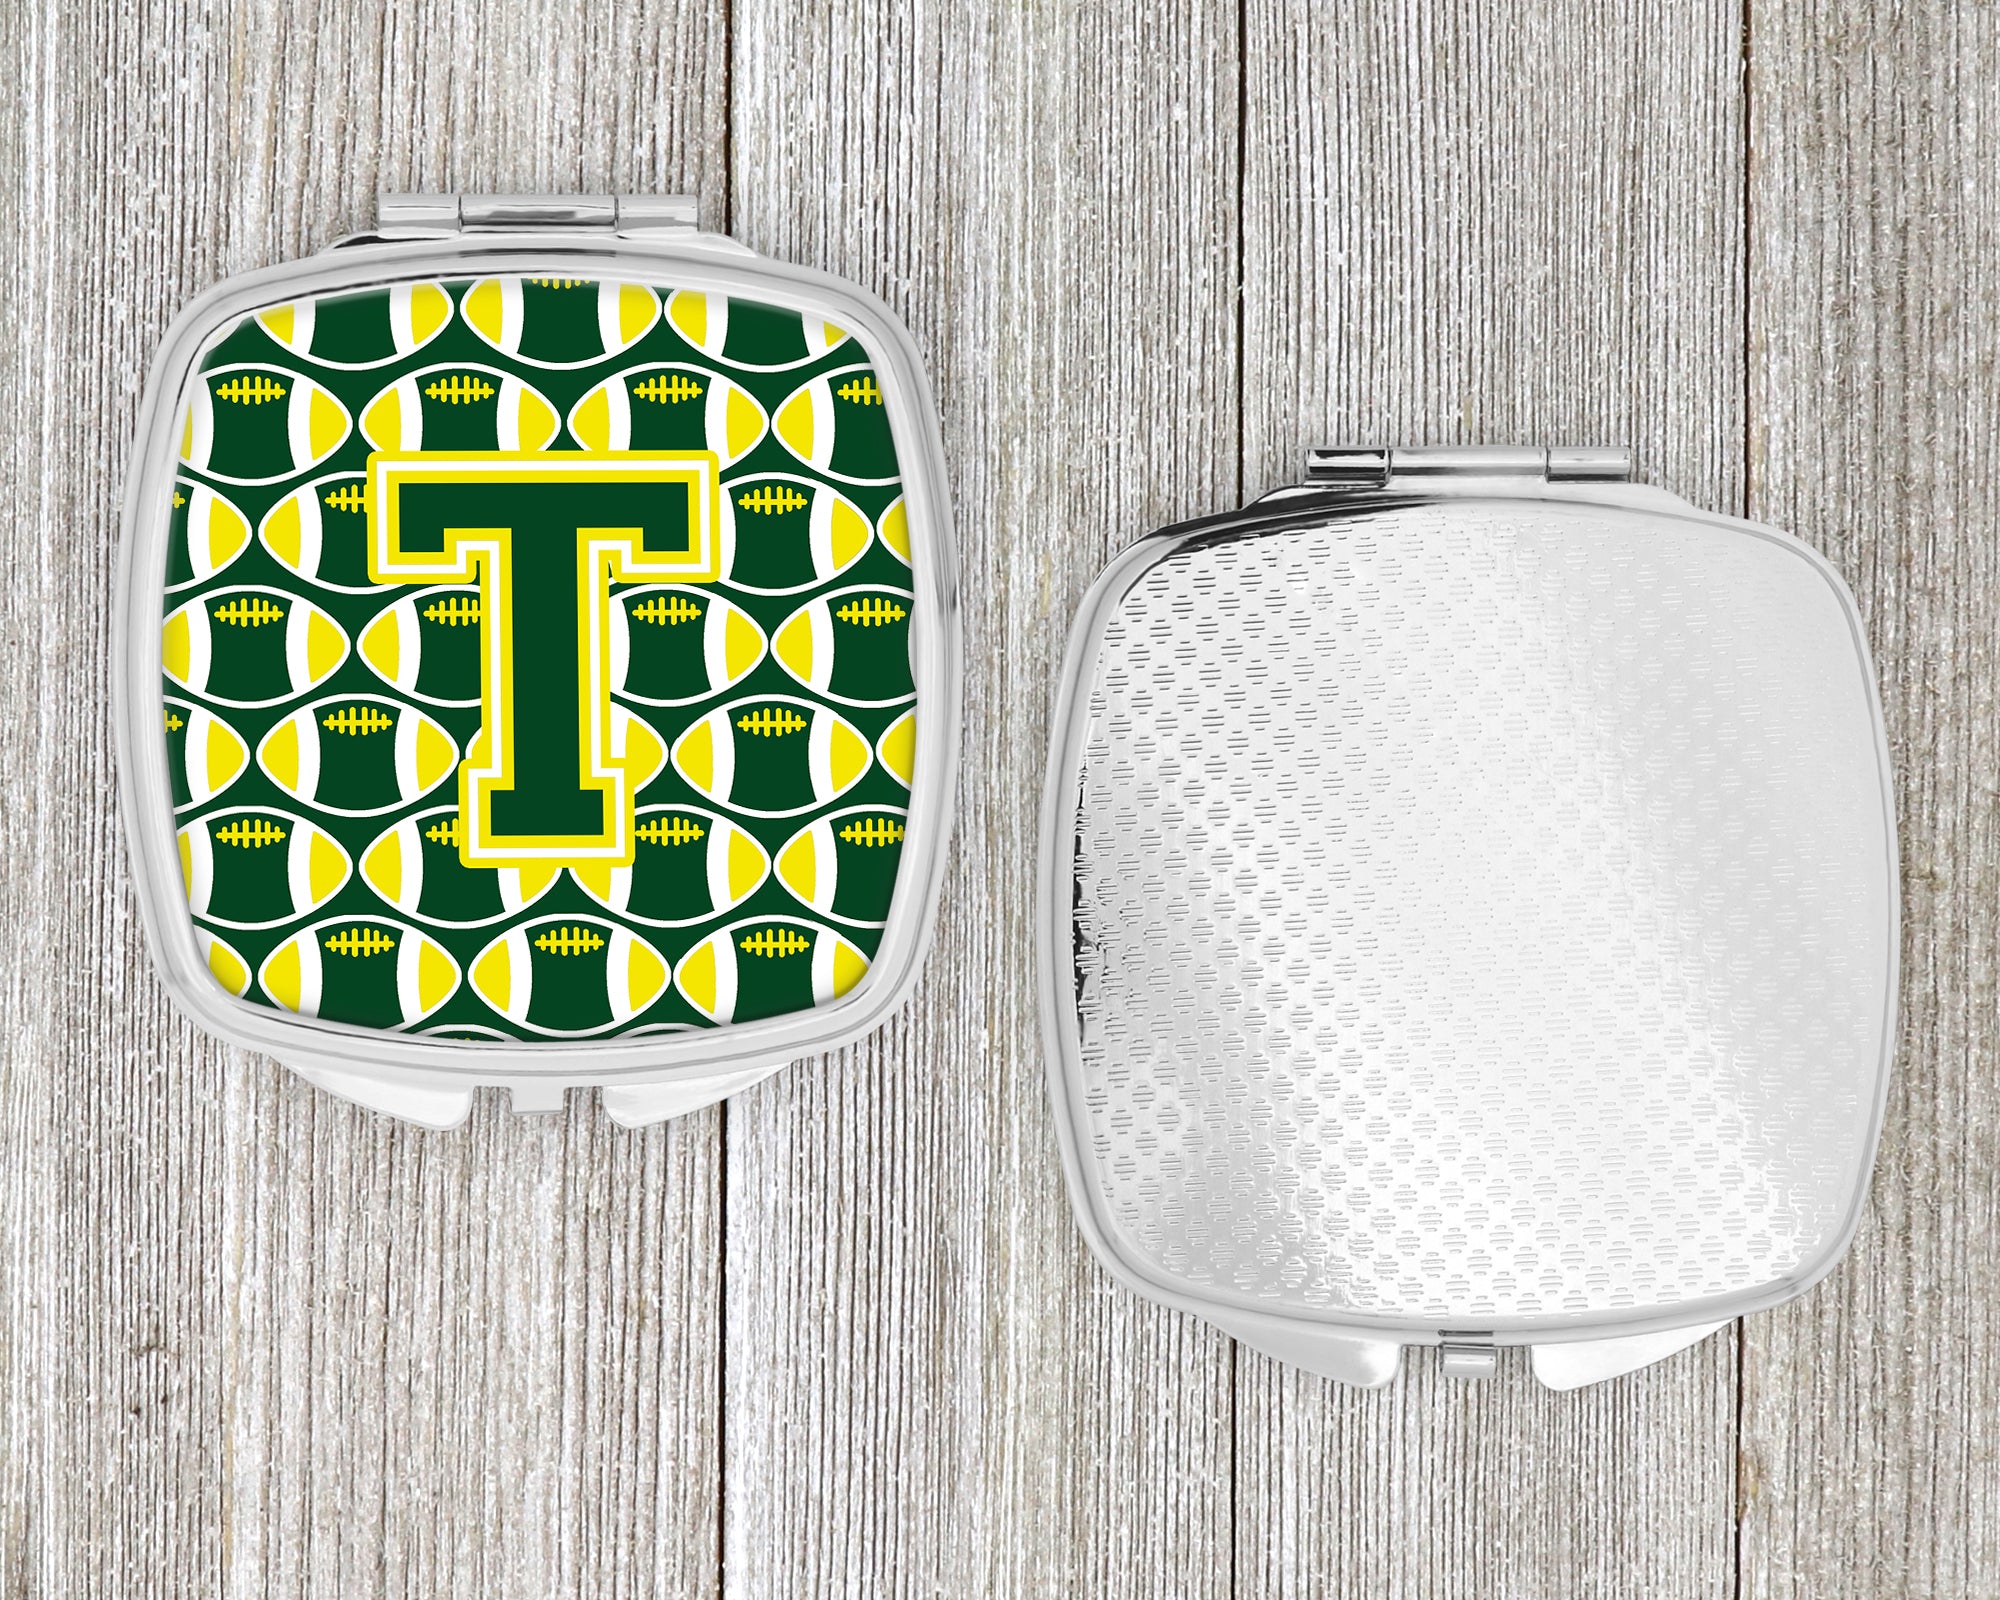 Letter T Football Green and Yellow Compact Mirror CJ1075-TSCM  the-store.com.